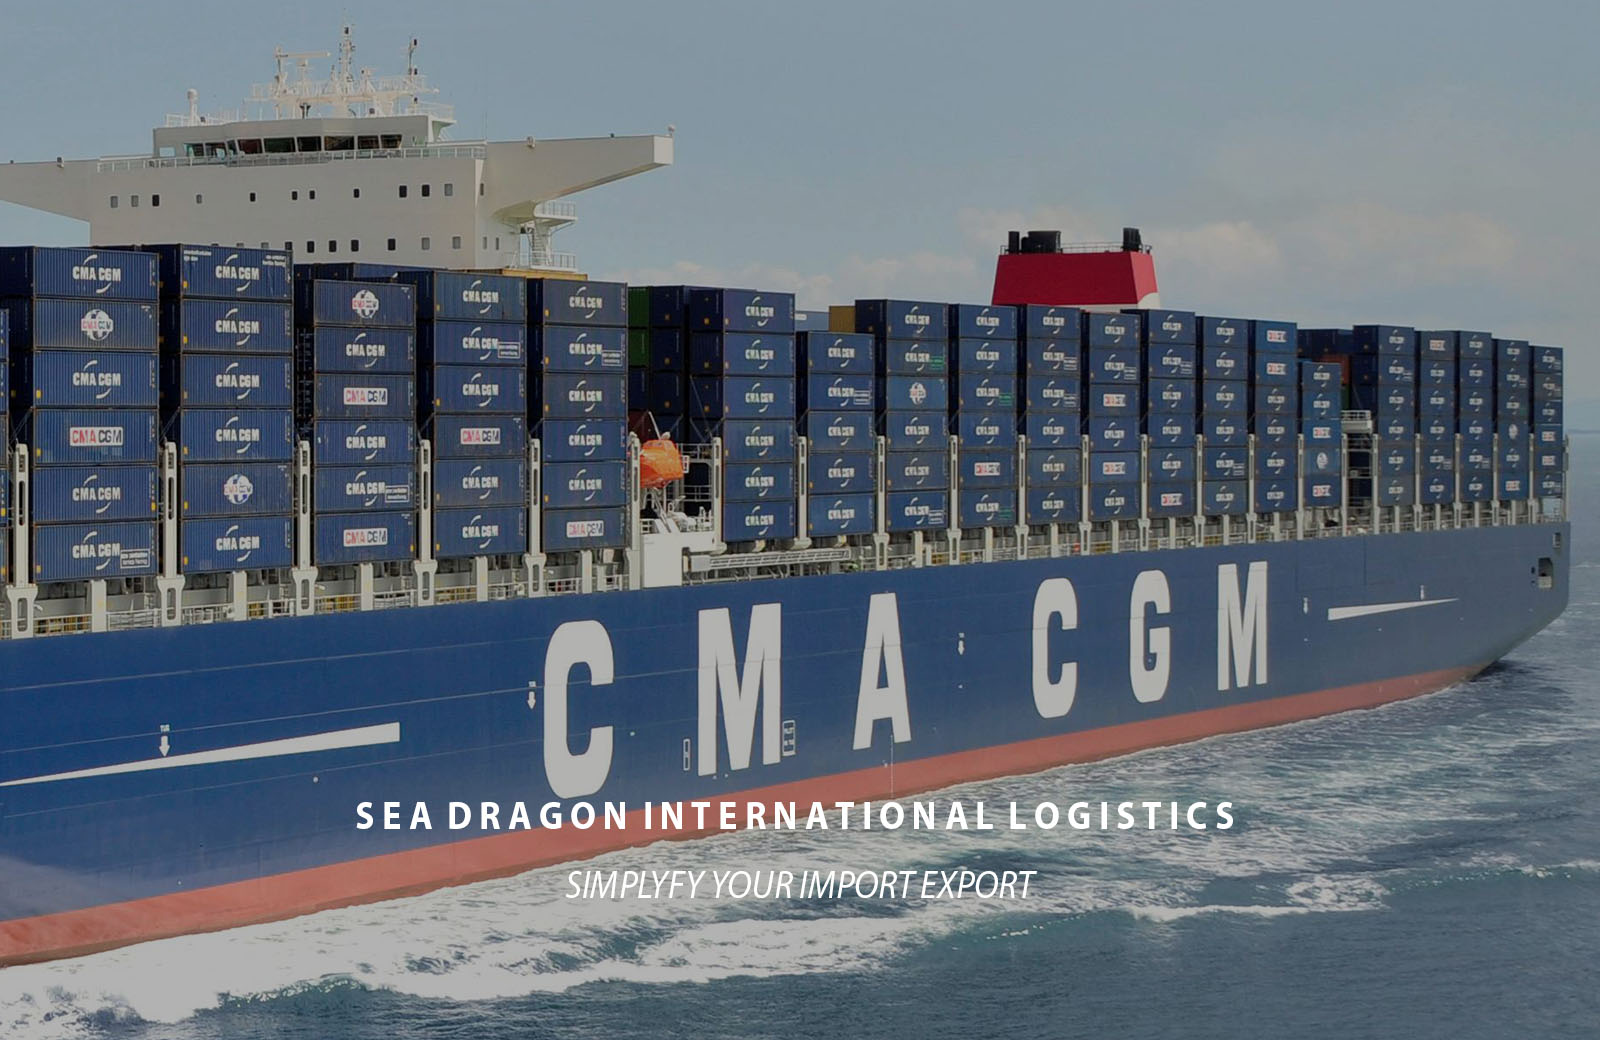 CMA CGM makes the decision to stop all spot rate increases - SEA DRAGON 2